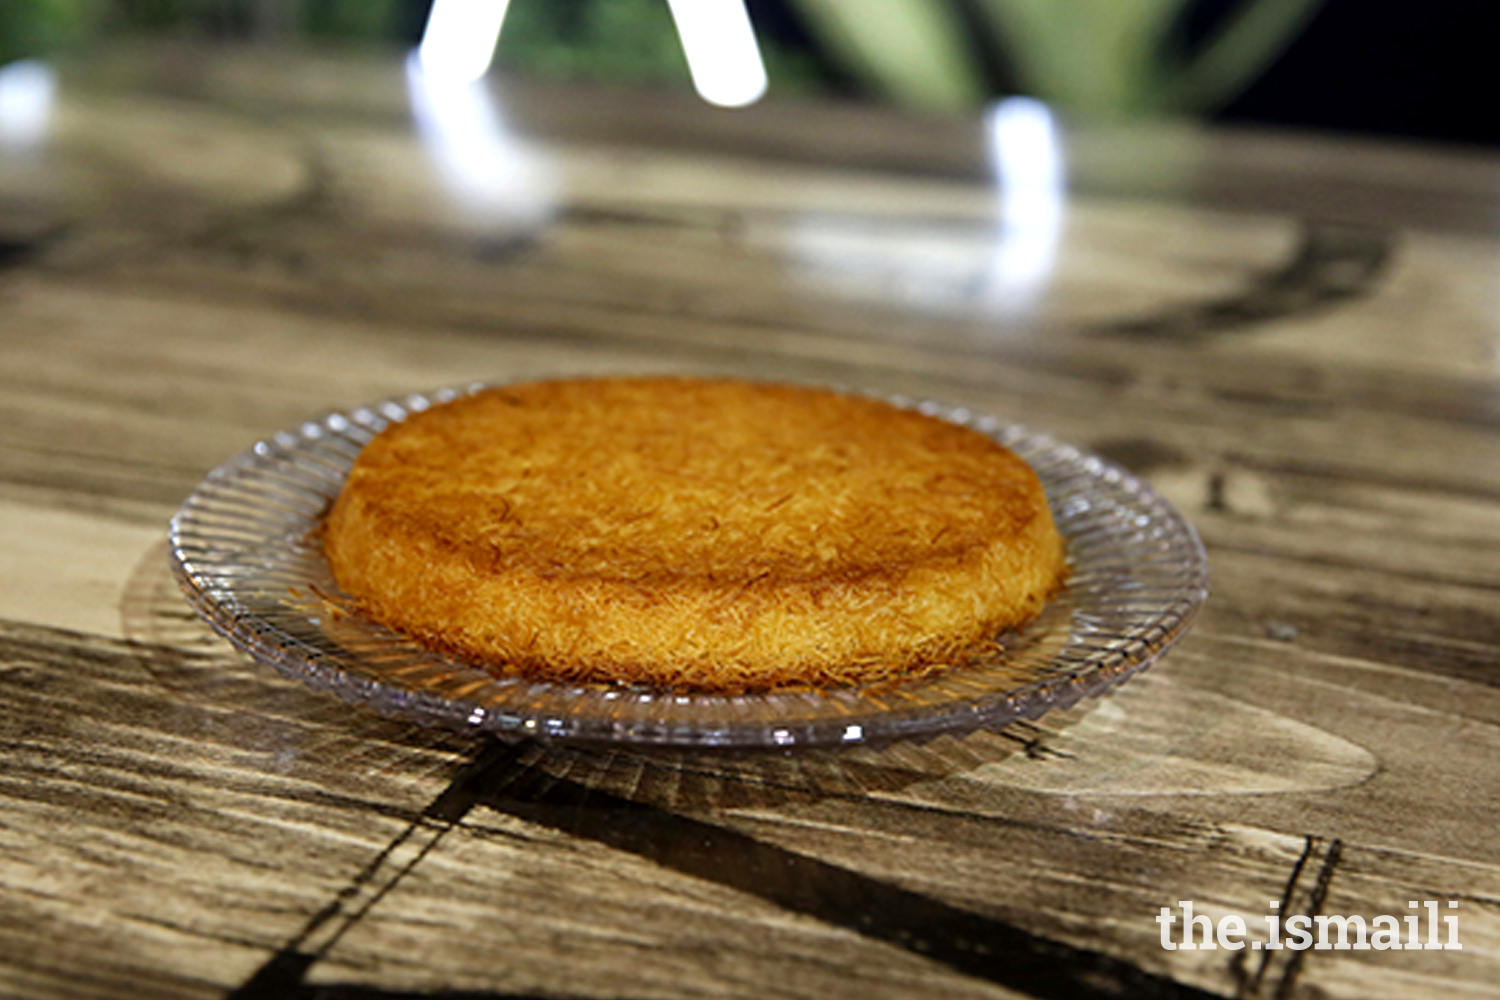 Dripping with syrup, kunafa is a sophisticated delicacy perfect for any dessert menu.